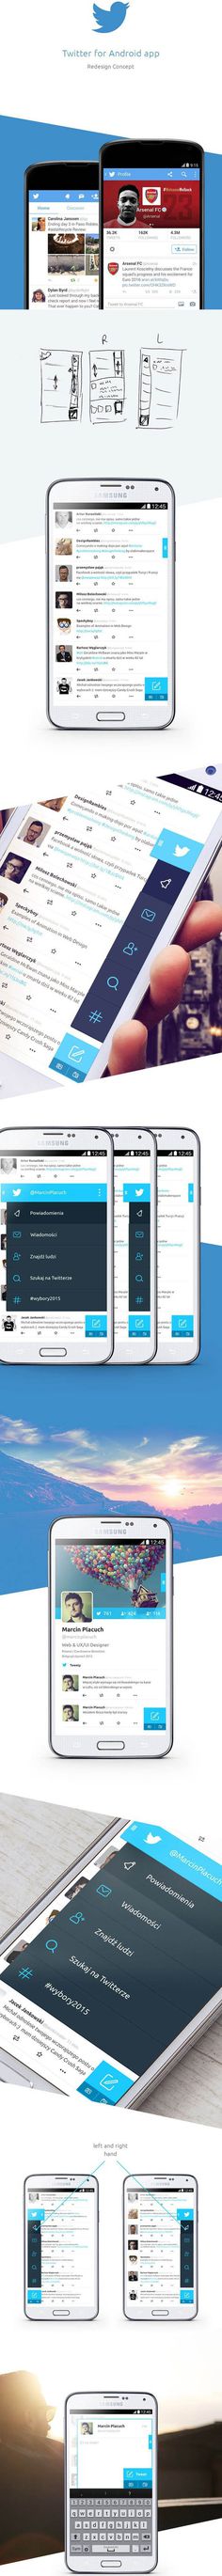 Twitter for Android – redesign concept by Marcin Placuch